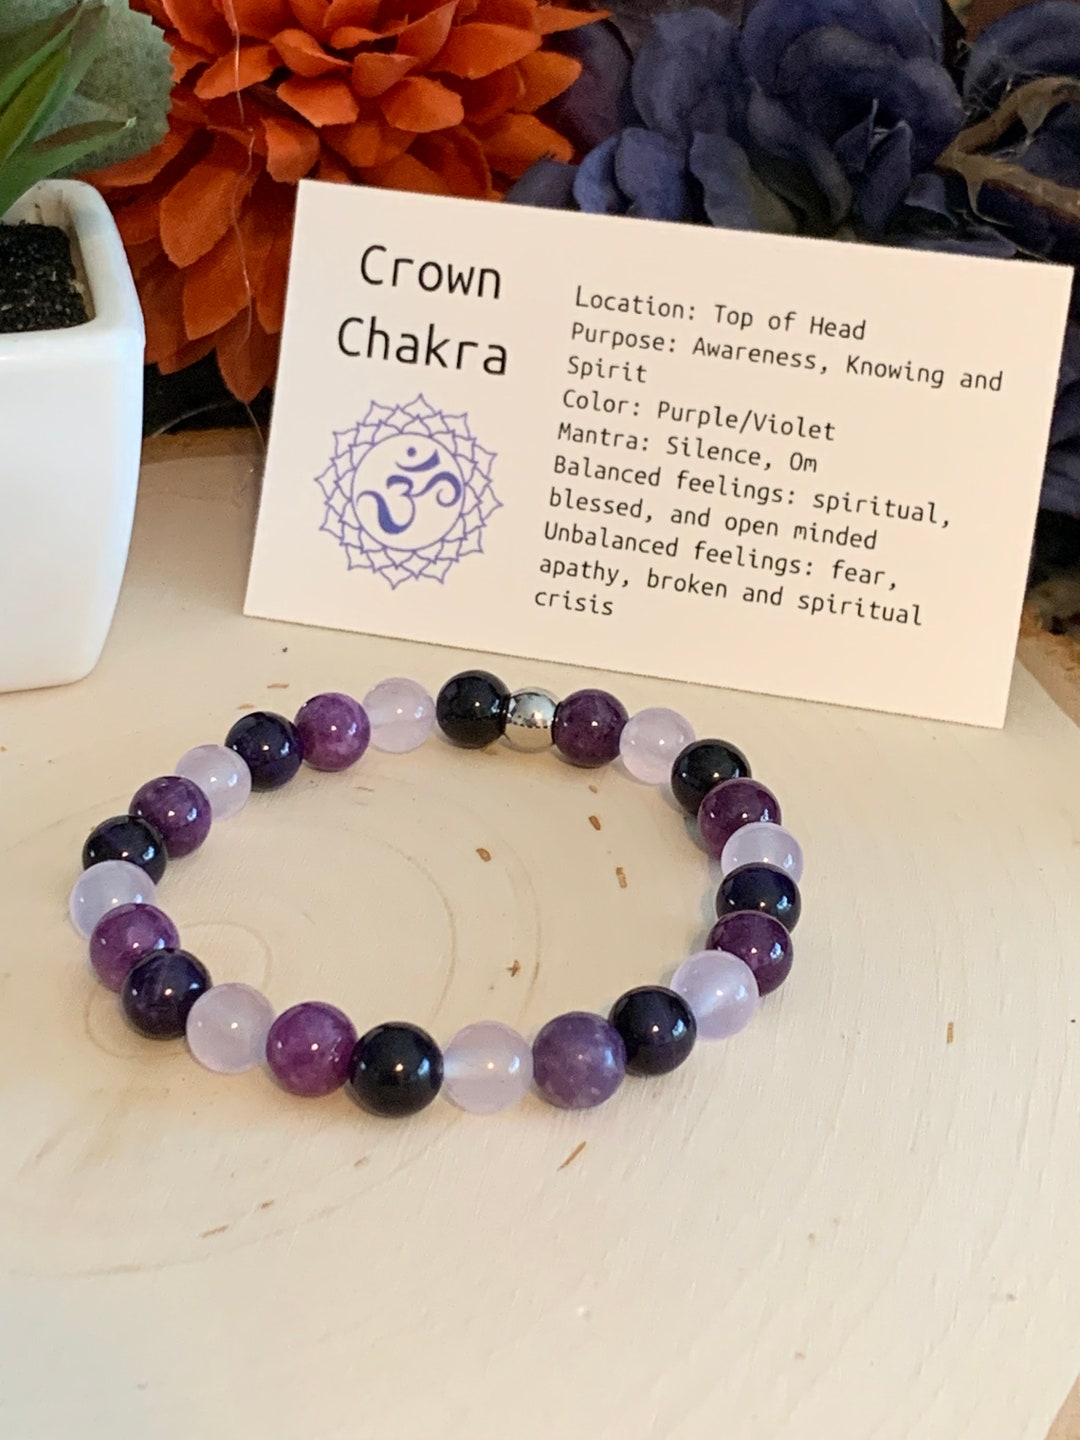 How to Use a Chakra Bracelet and its Benefits: A Beginner's Guide